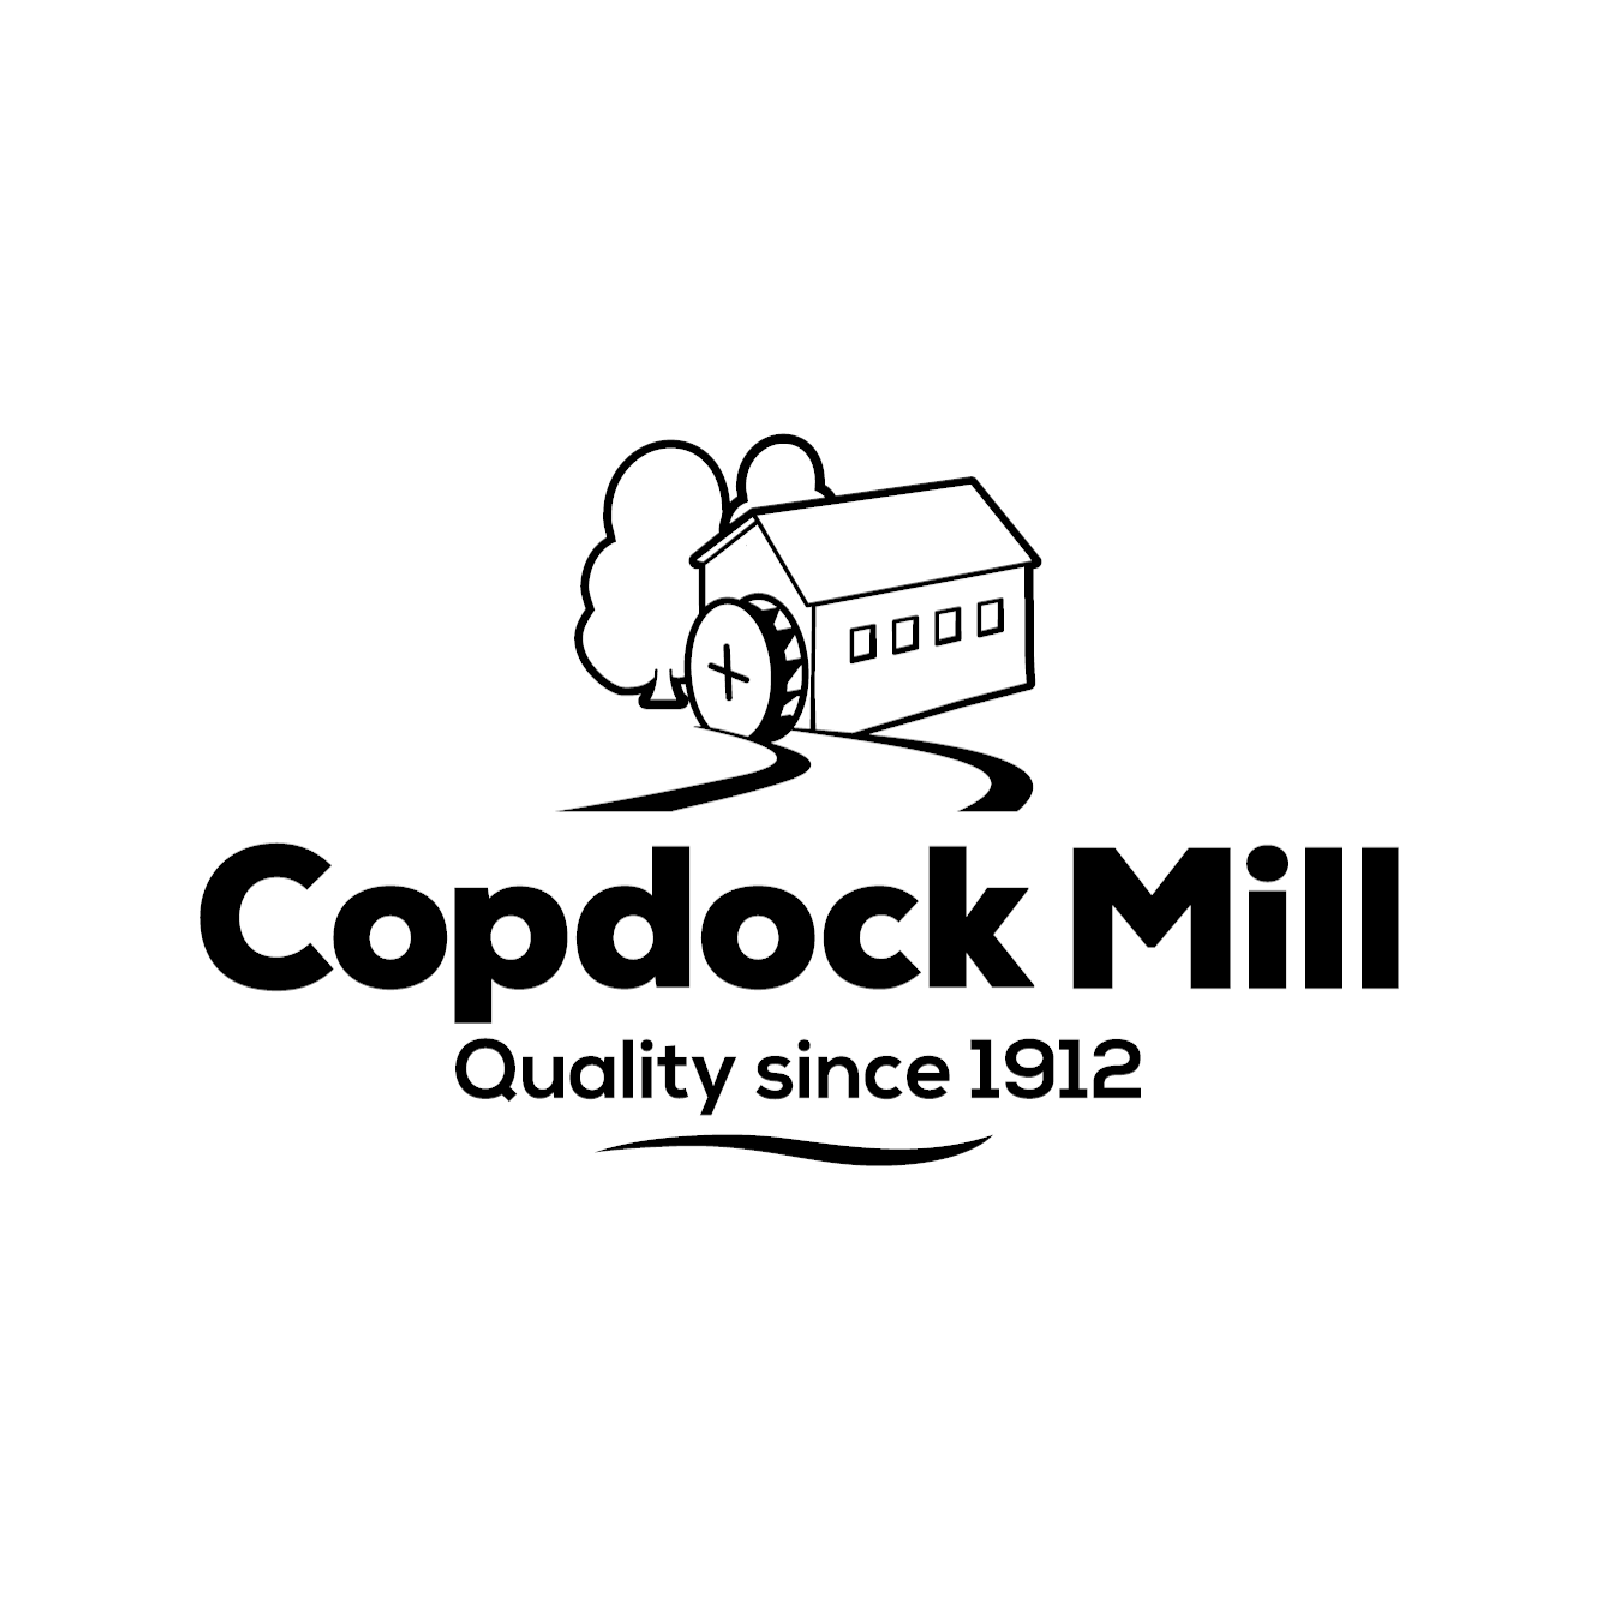 Copdock Mill Quality Since 1912 Logo